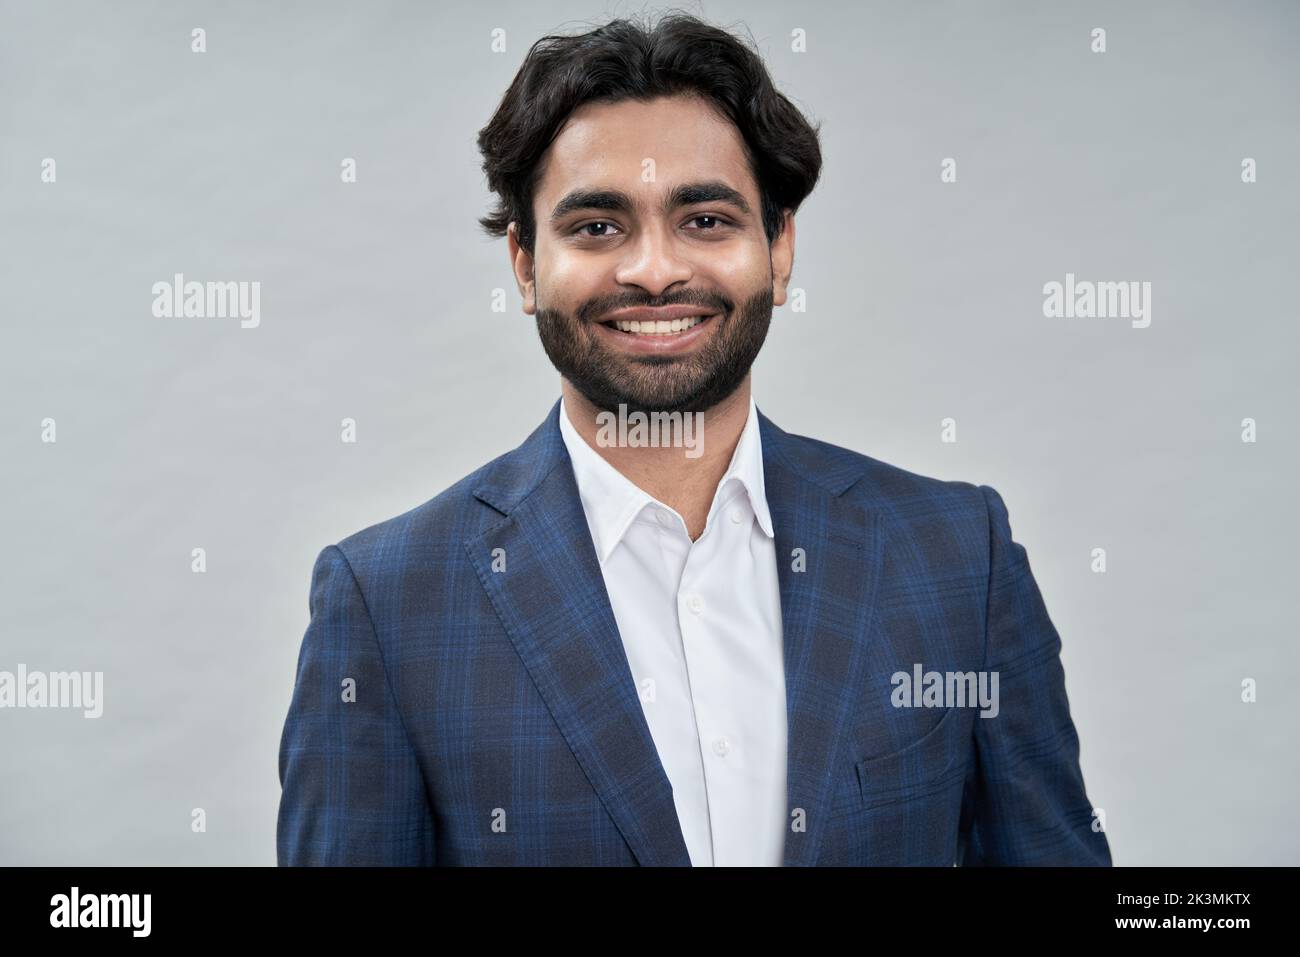 Happy young indian arab business man wearing suit. Headshot portrait Stock Photo